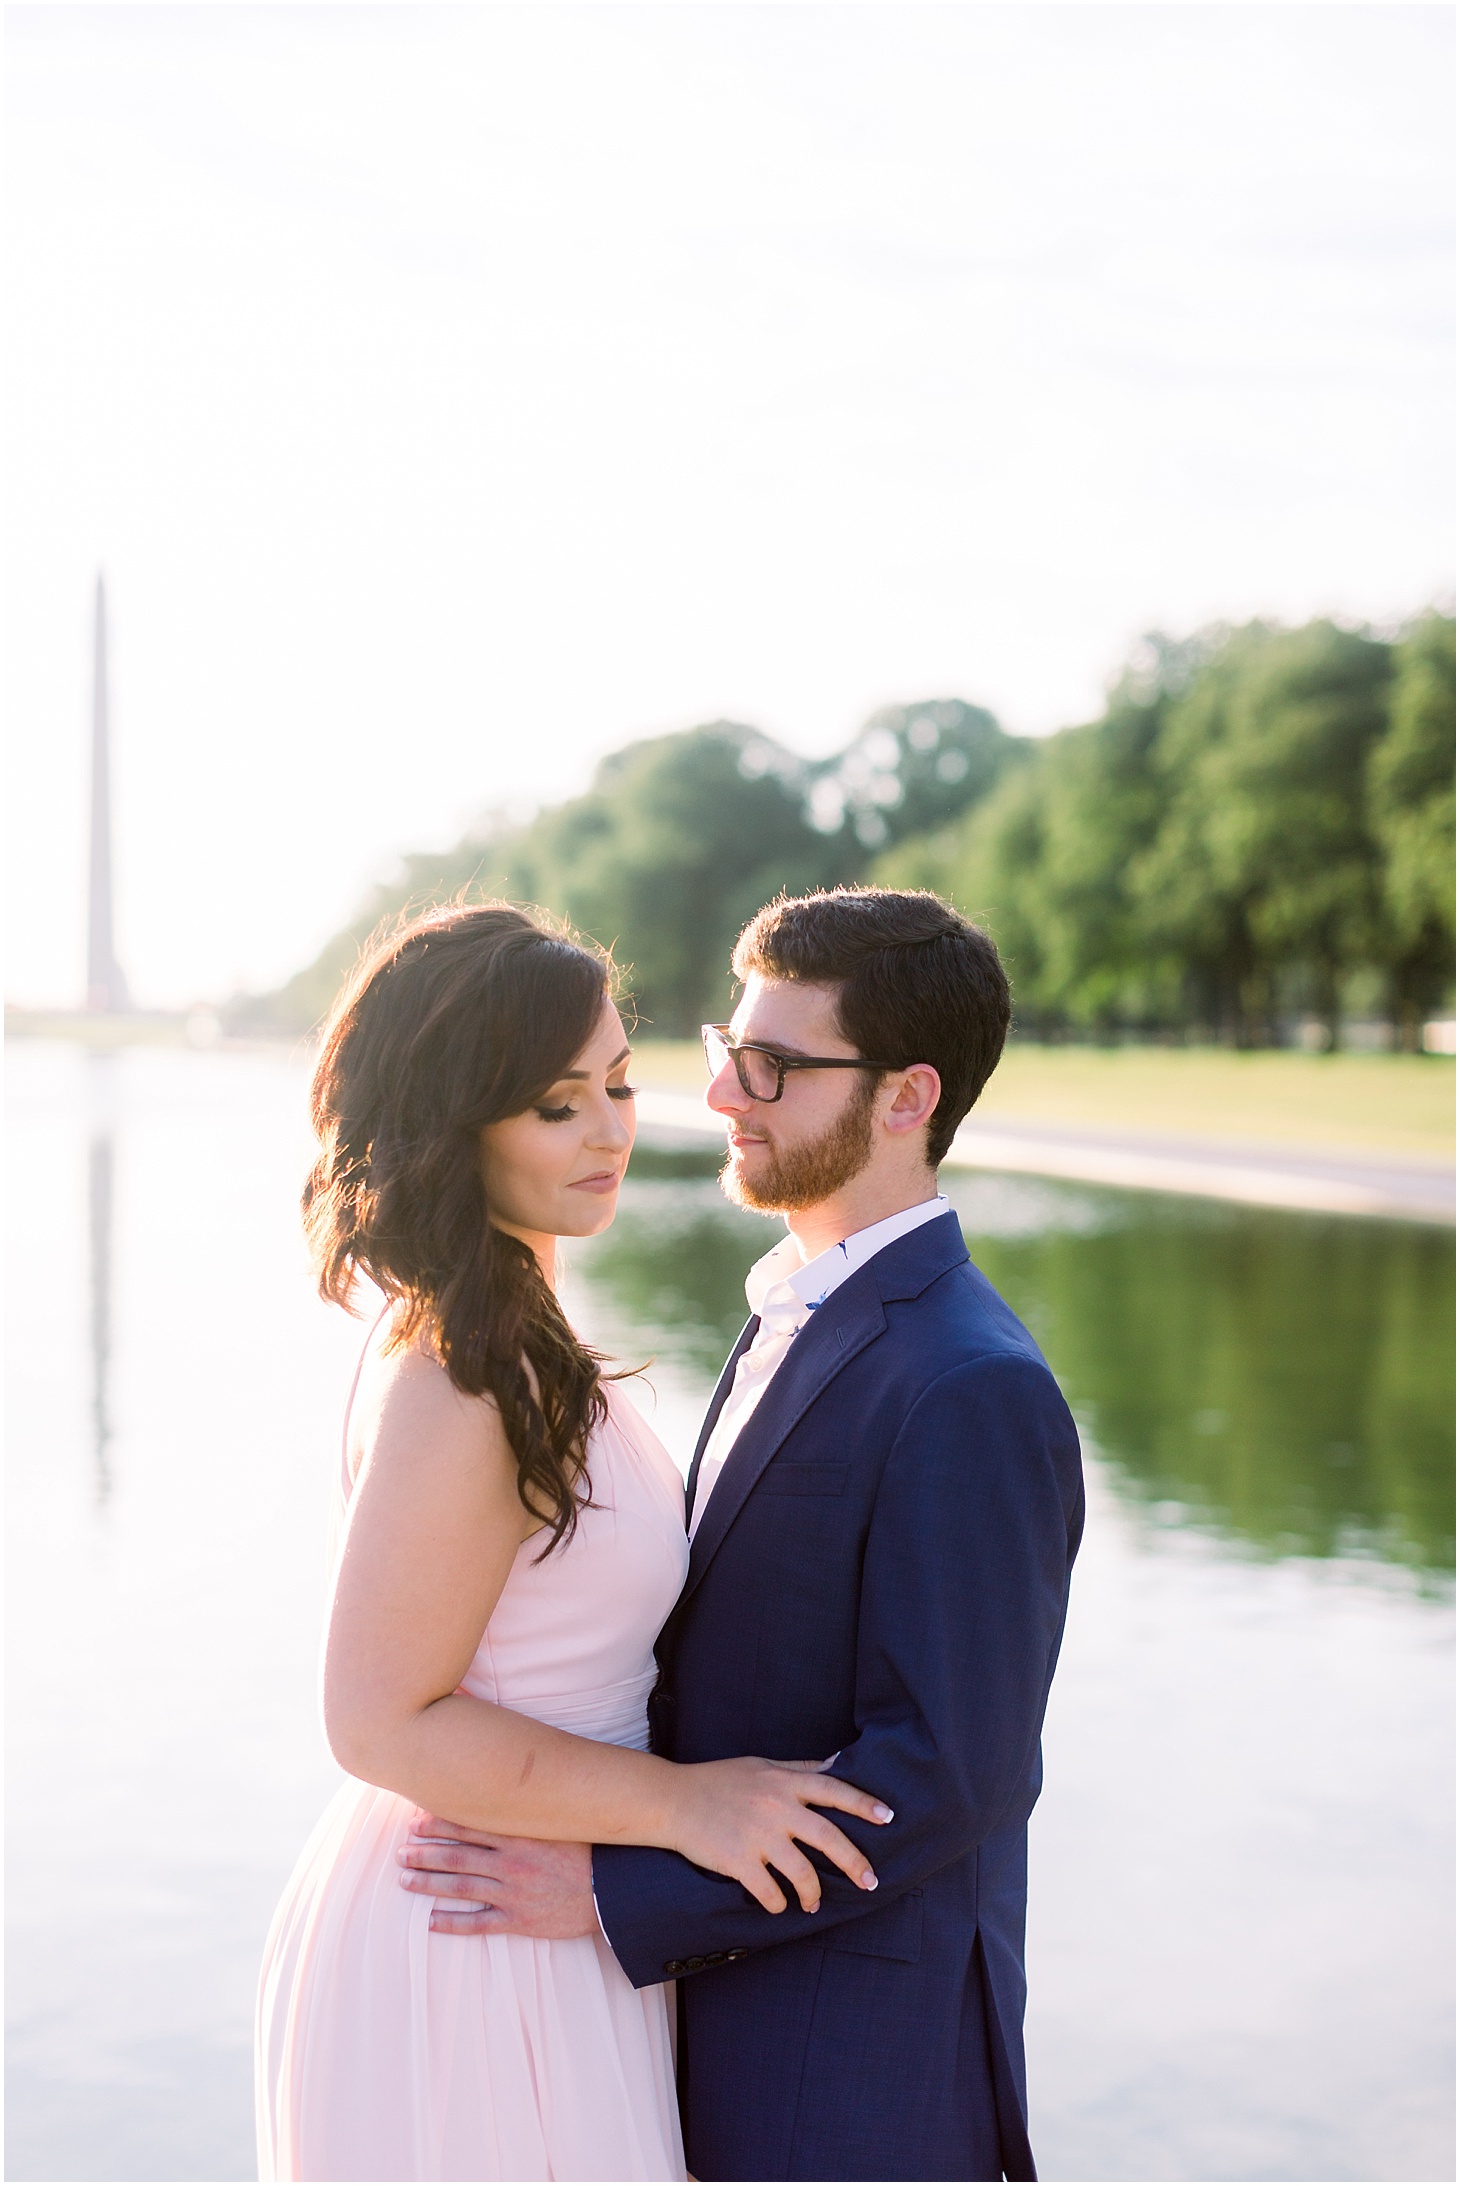 Engagement Portraits at the Lincoln Memorial Reflecting Pool | Romantic Sunrise Engagement Session at the Smithsonian Gardens | Sarah Bradshaw Photography